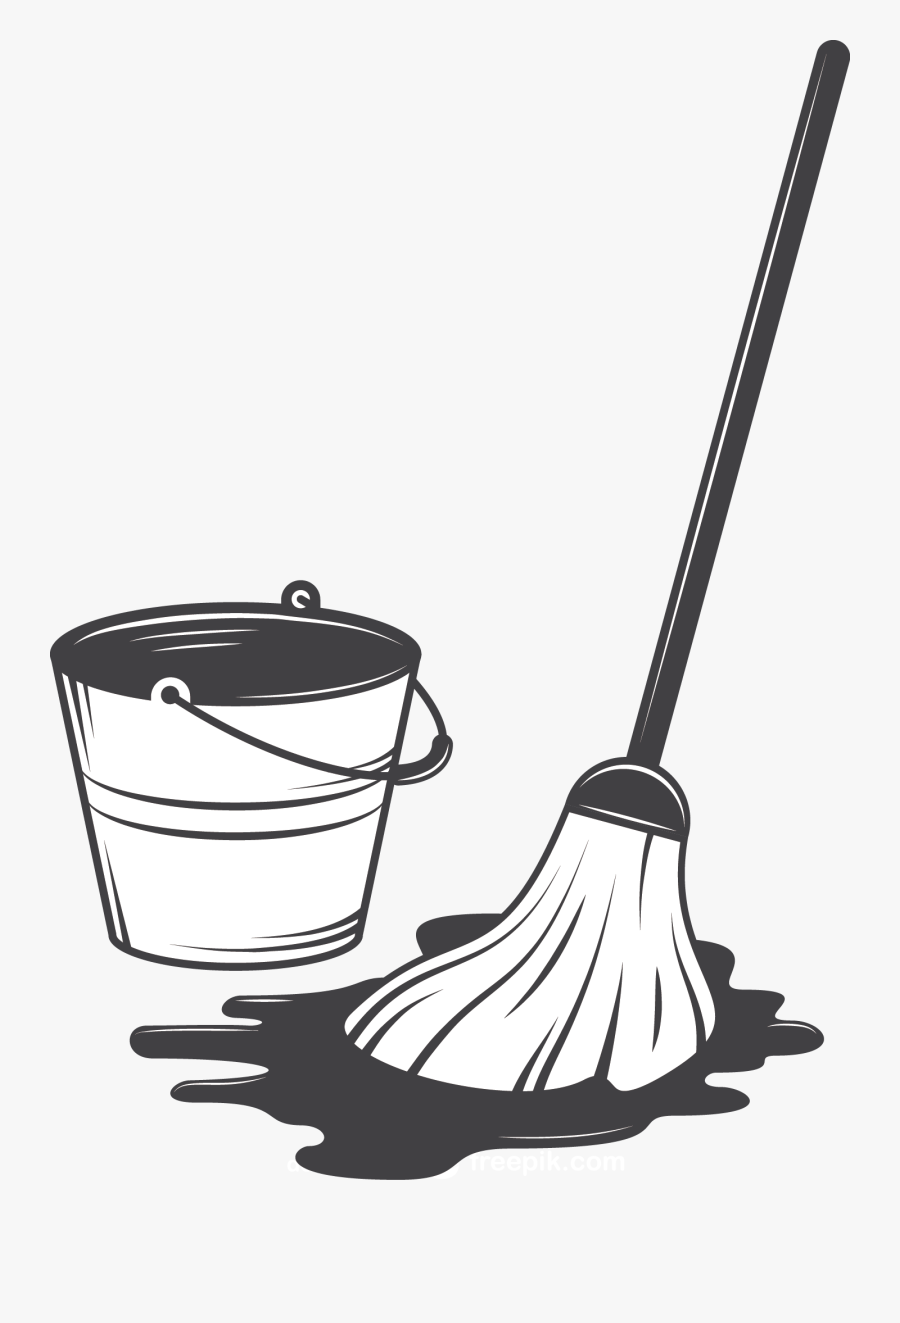 Clip Art Cleaning Tools Clip Art - Cleaning Services Drawing Png, Transparent Clipart